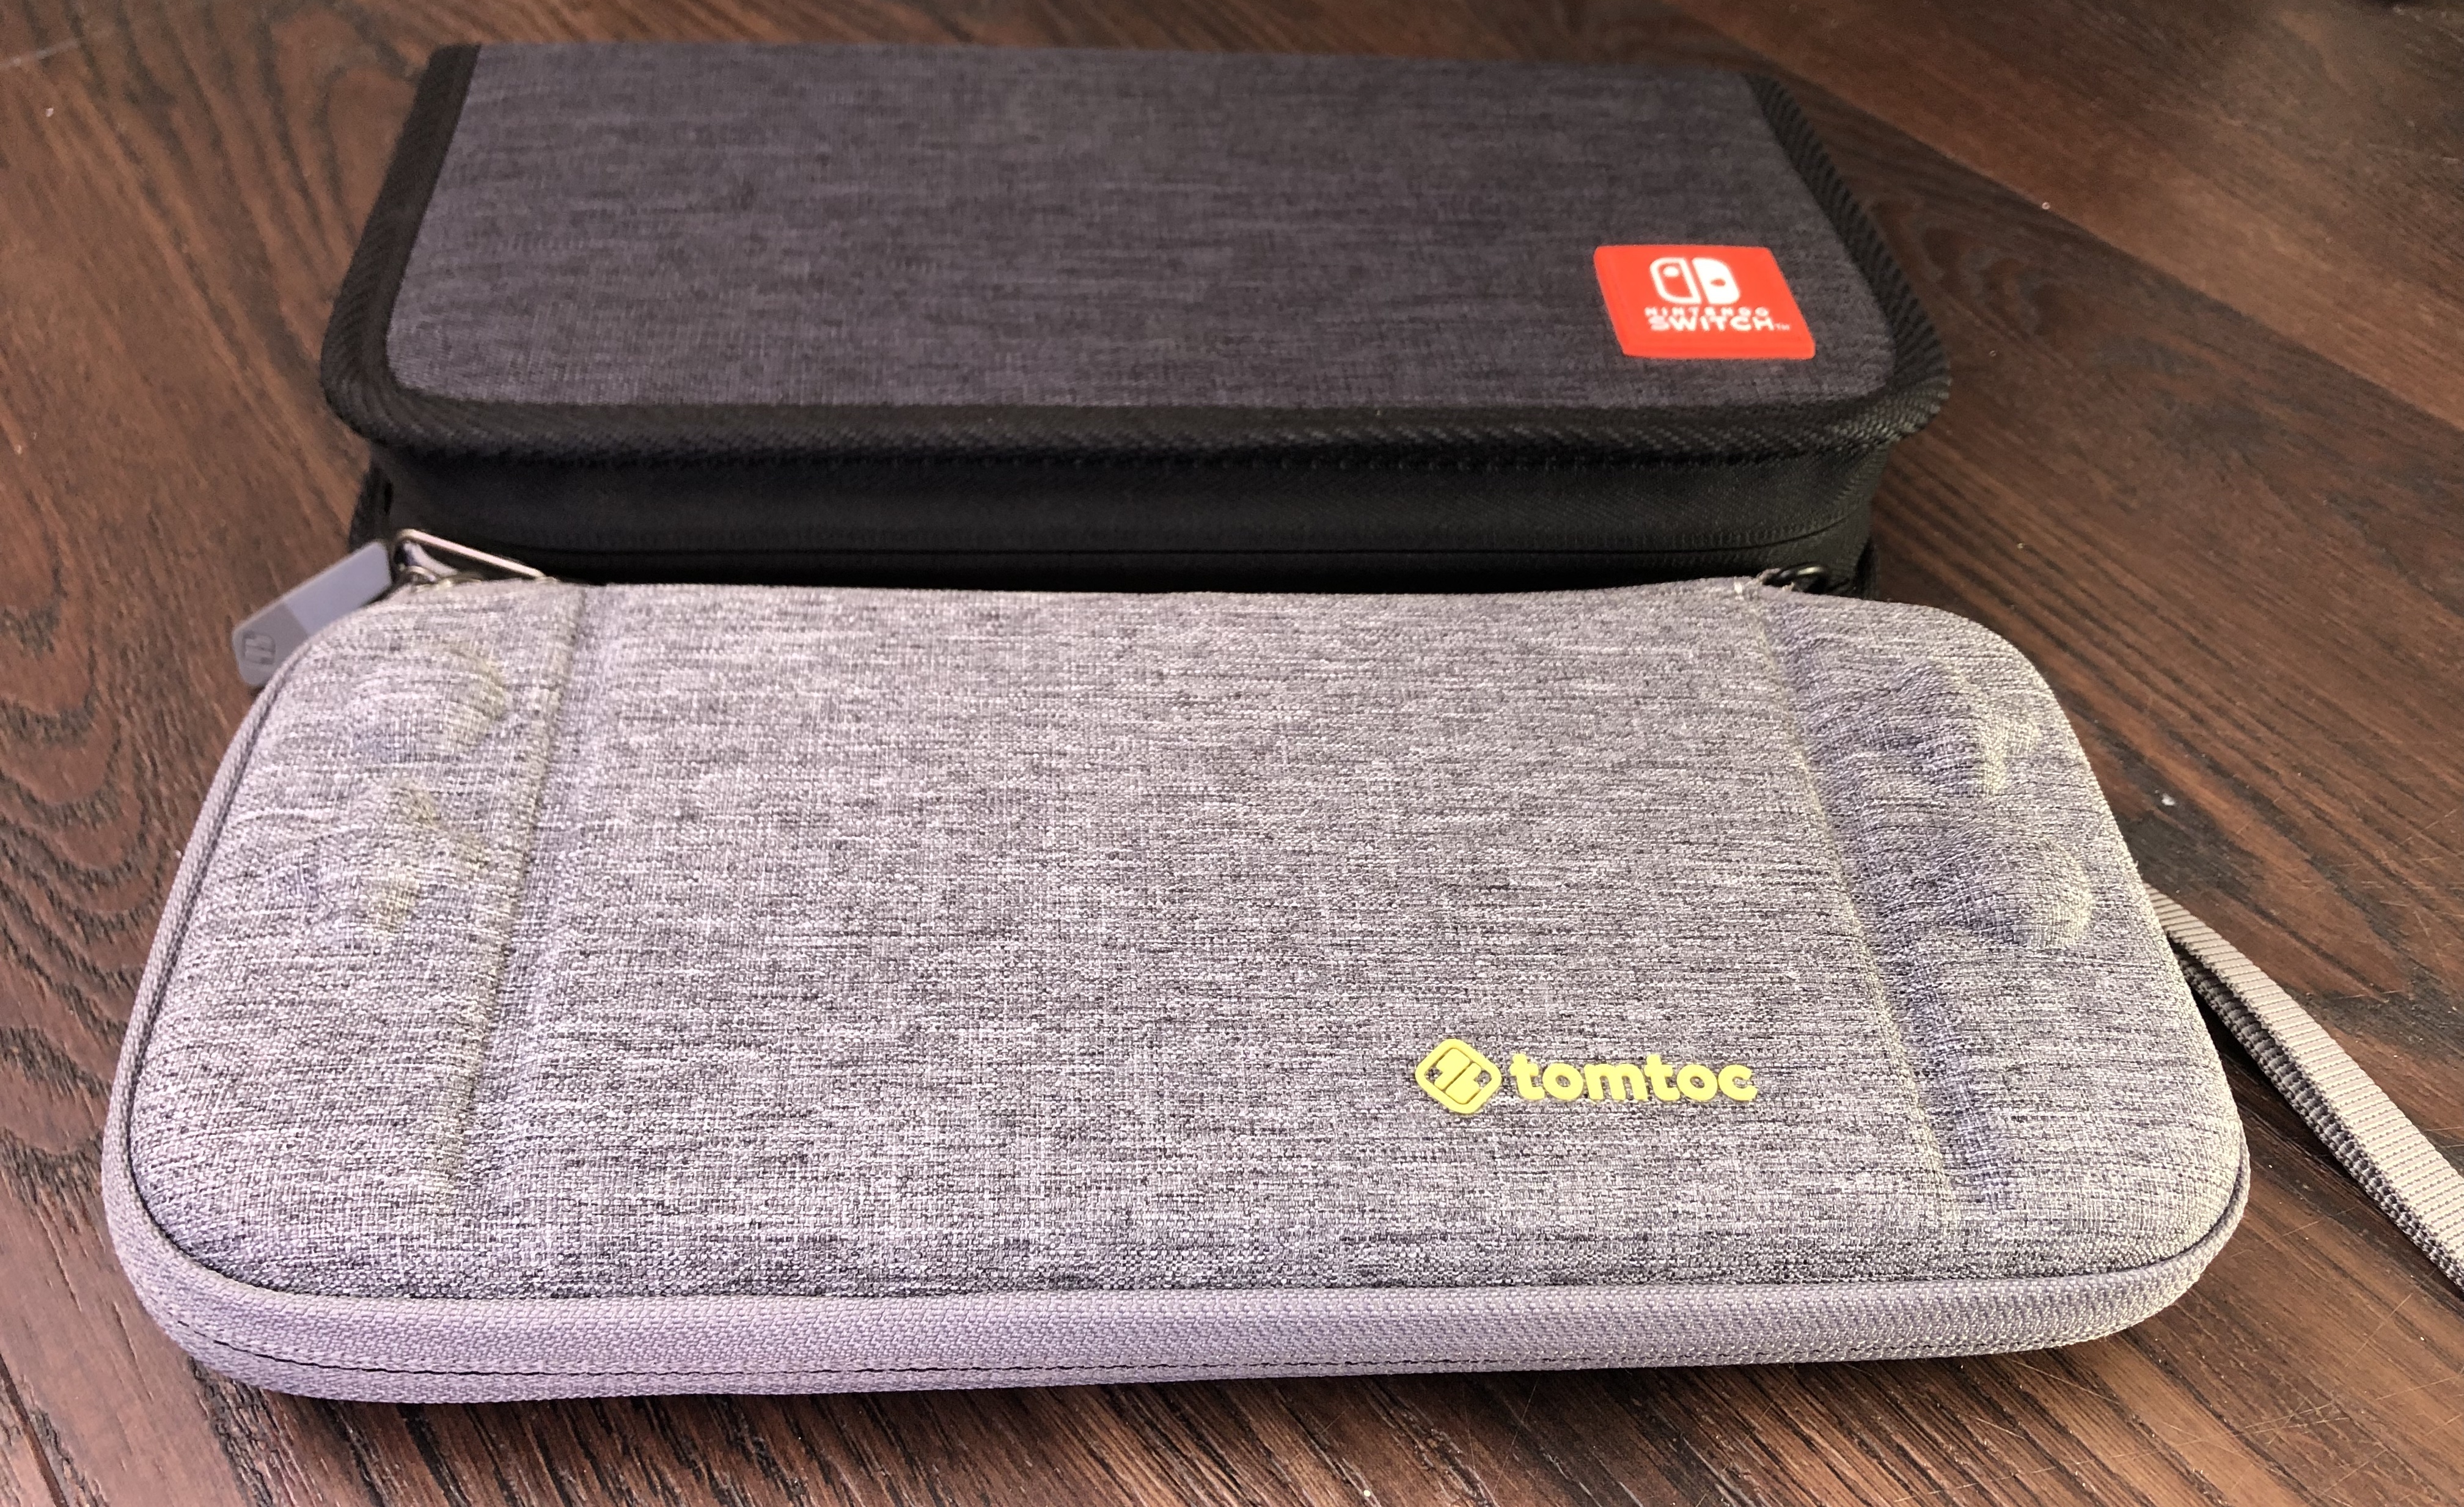 switch tomtoc case